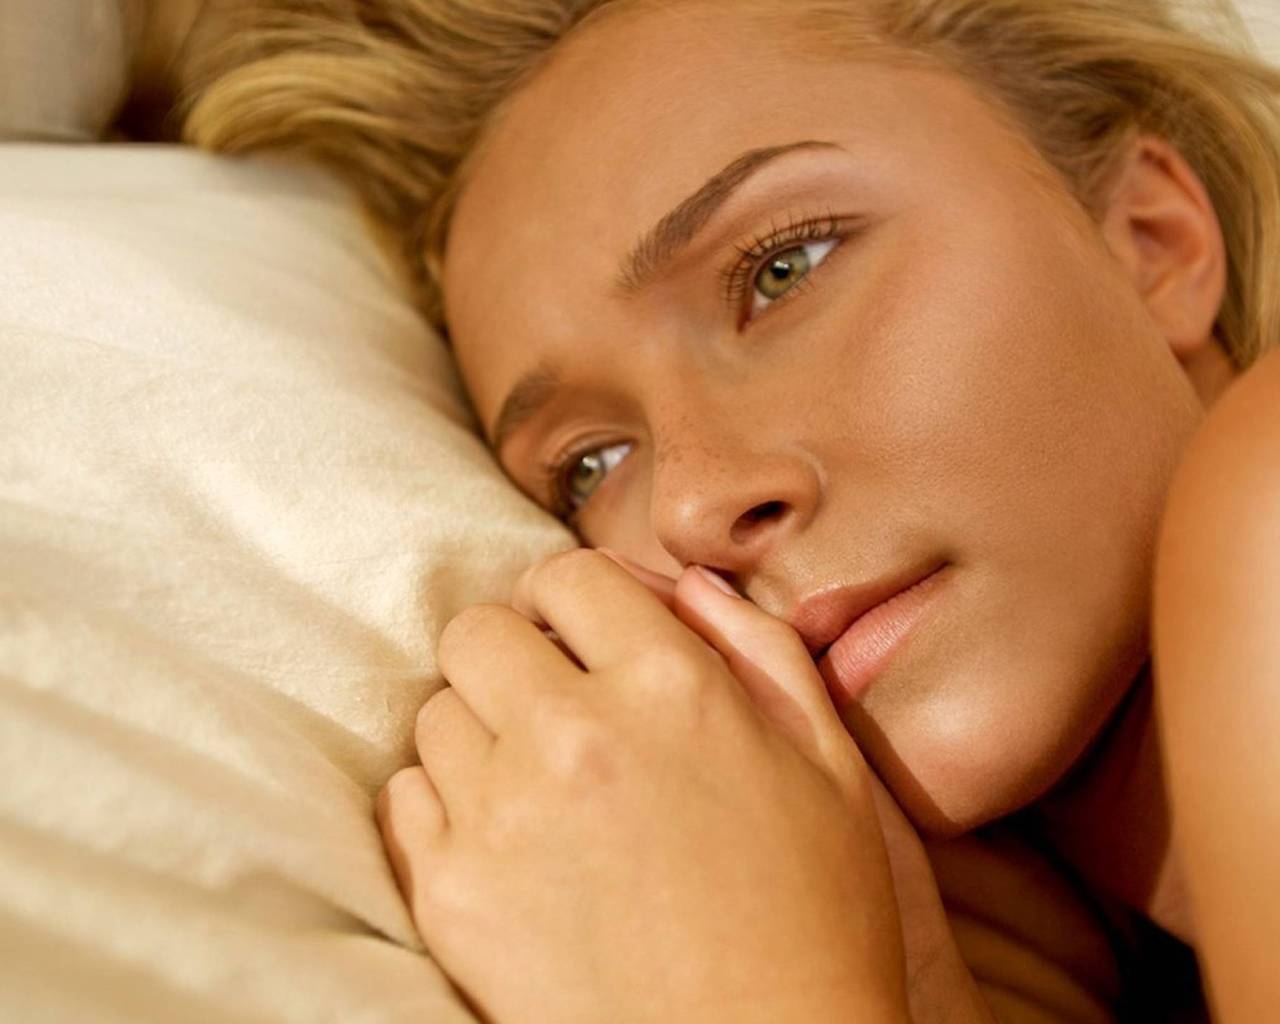 Hayden Panettiere in Bed for 1280 x 1024 resolution